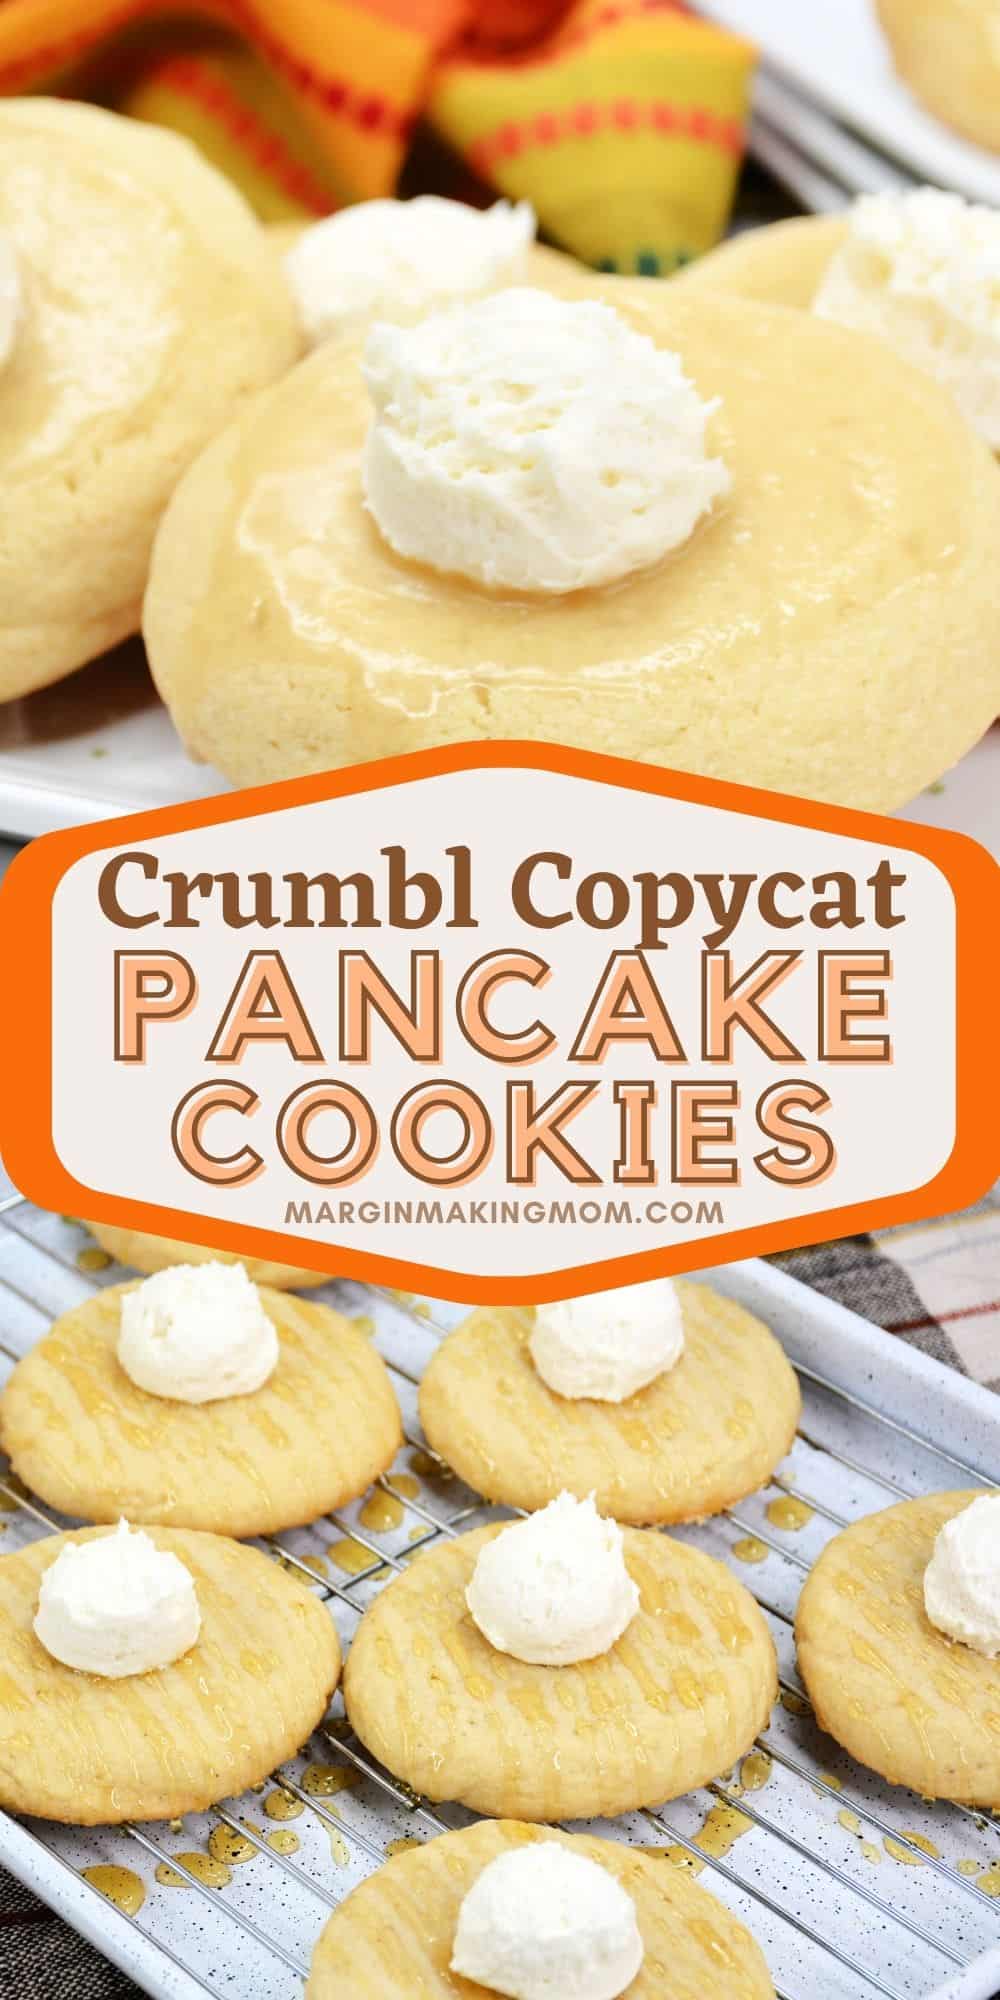 collage image of two photos. The first shows a close-up view of a pancake cookie, while the second shows multiple copycat Crumbl pancake cookies on a cooling rack.